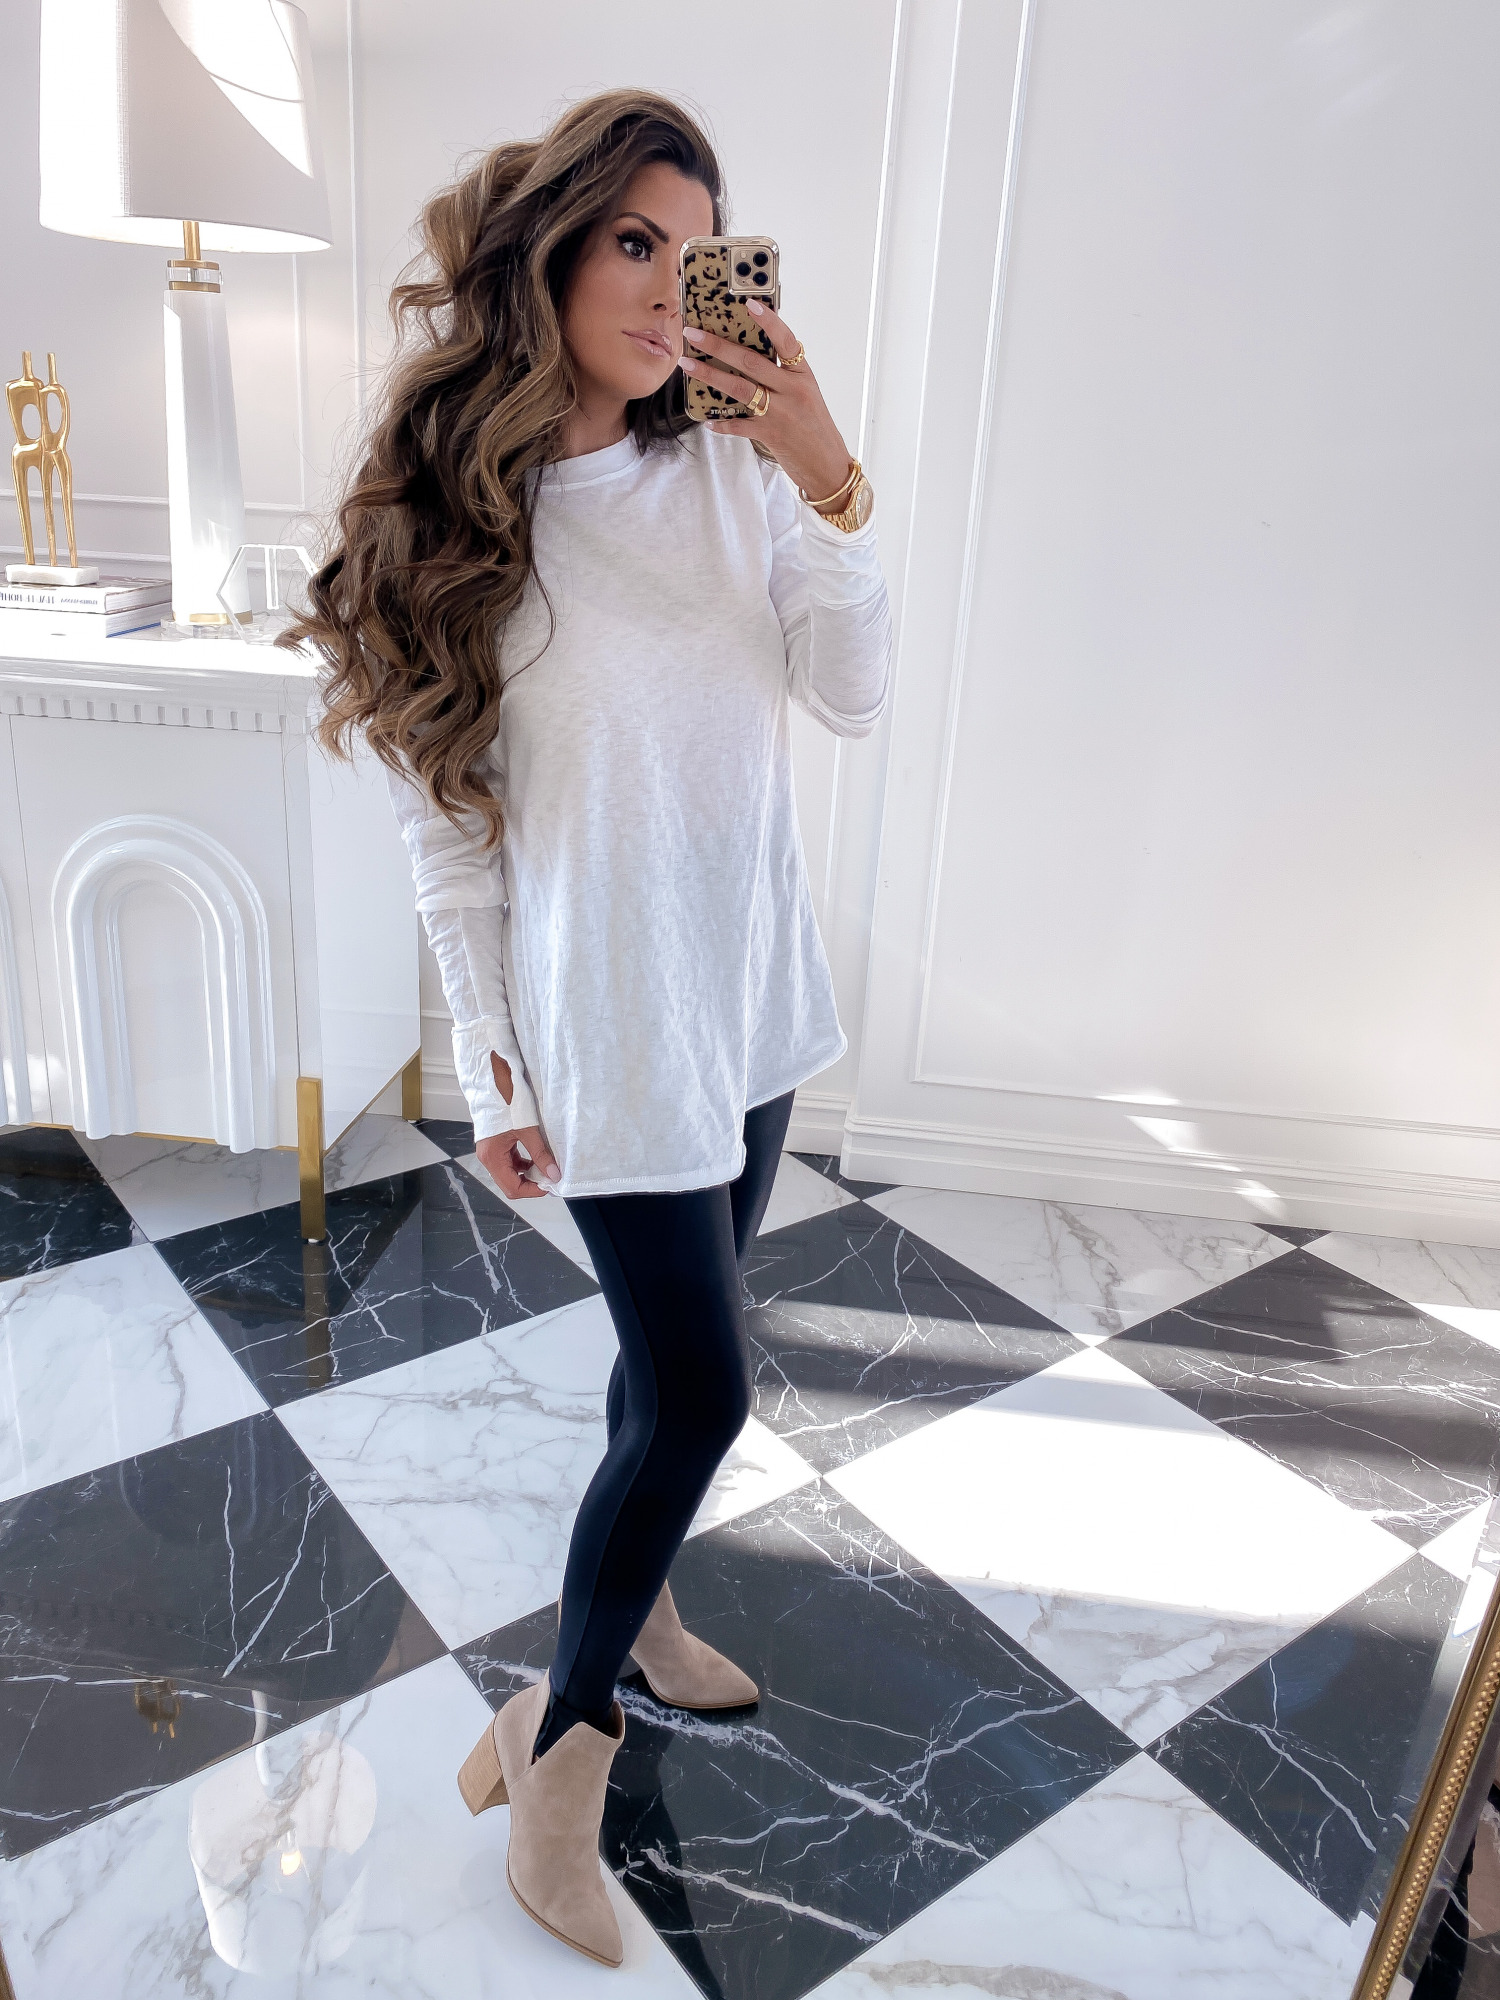 Nsale 2020 must have best of sale blog post 2020 | Nordstrom Anniversary Sale by popular US fashion blog, The Sweetest Thing: collage image of Emily Gemma wearing a Free People Arden Extra Long Cotton Top, Steve Madden Kaylah Pointed Toe Bootie, and Zella Live In High Waist Leggings.